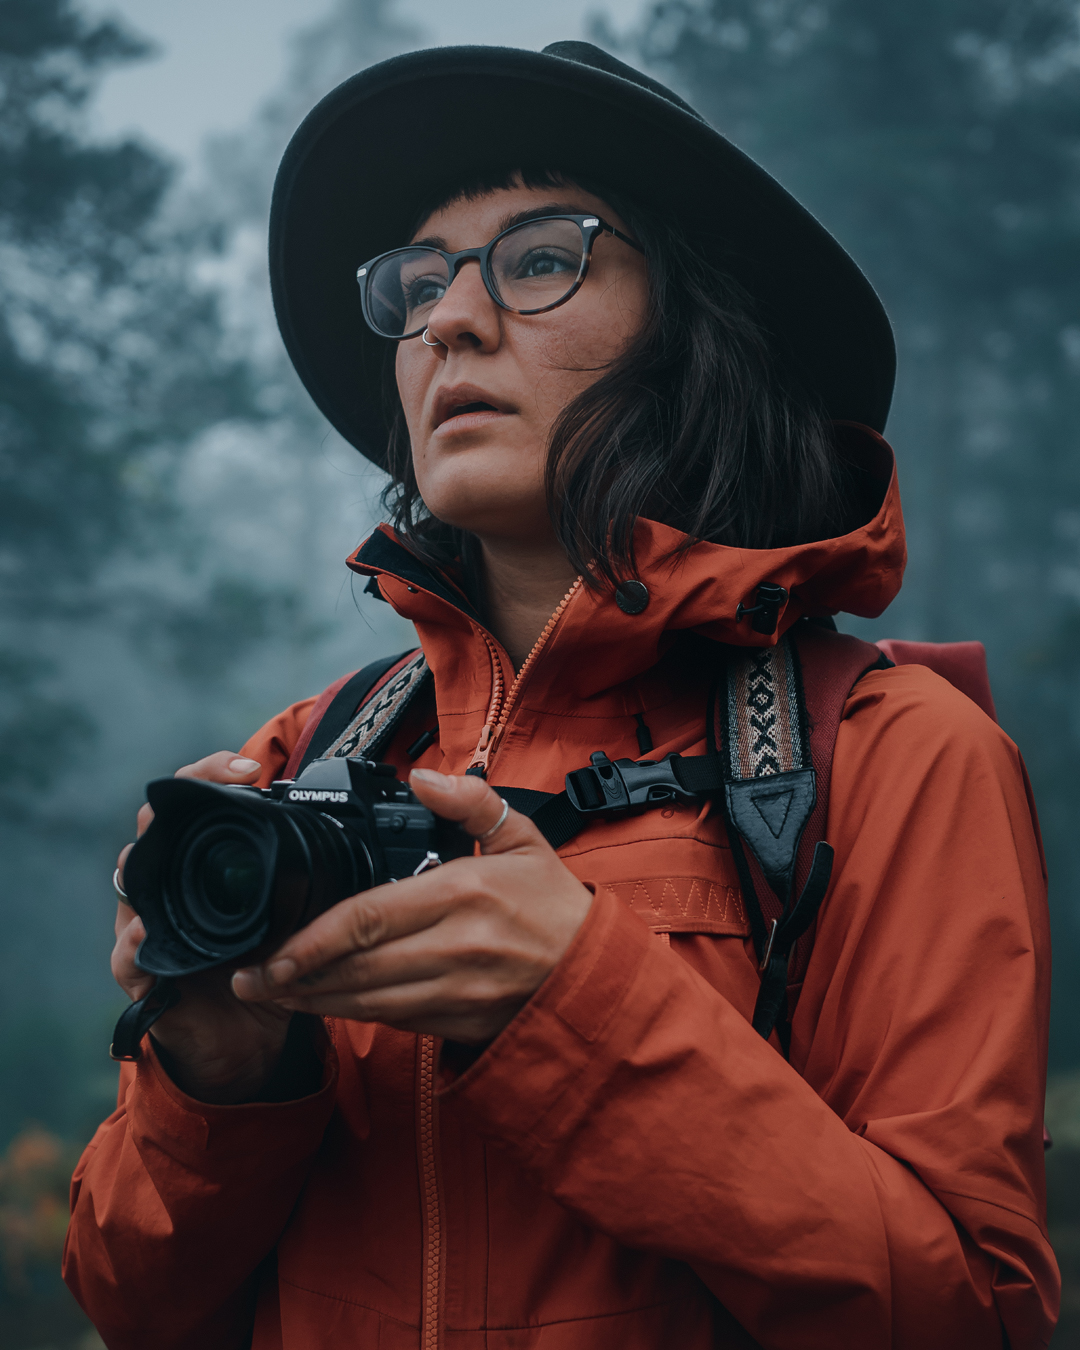 Outdoorsy woman with camera